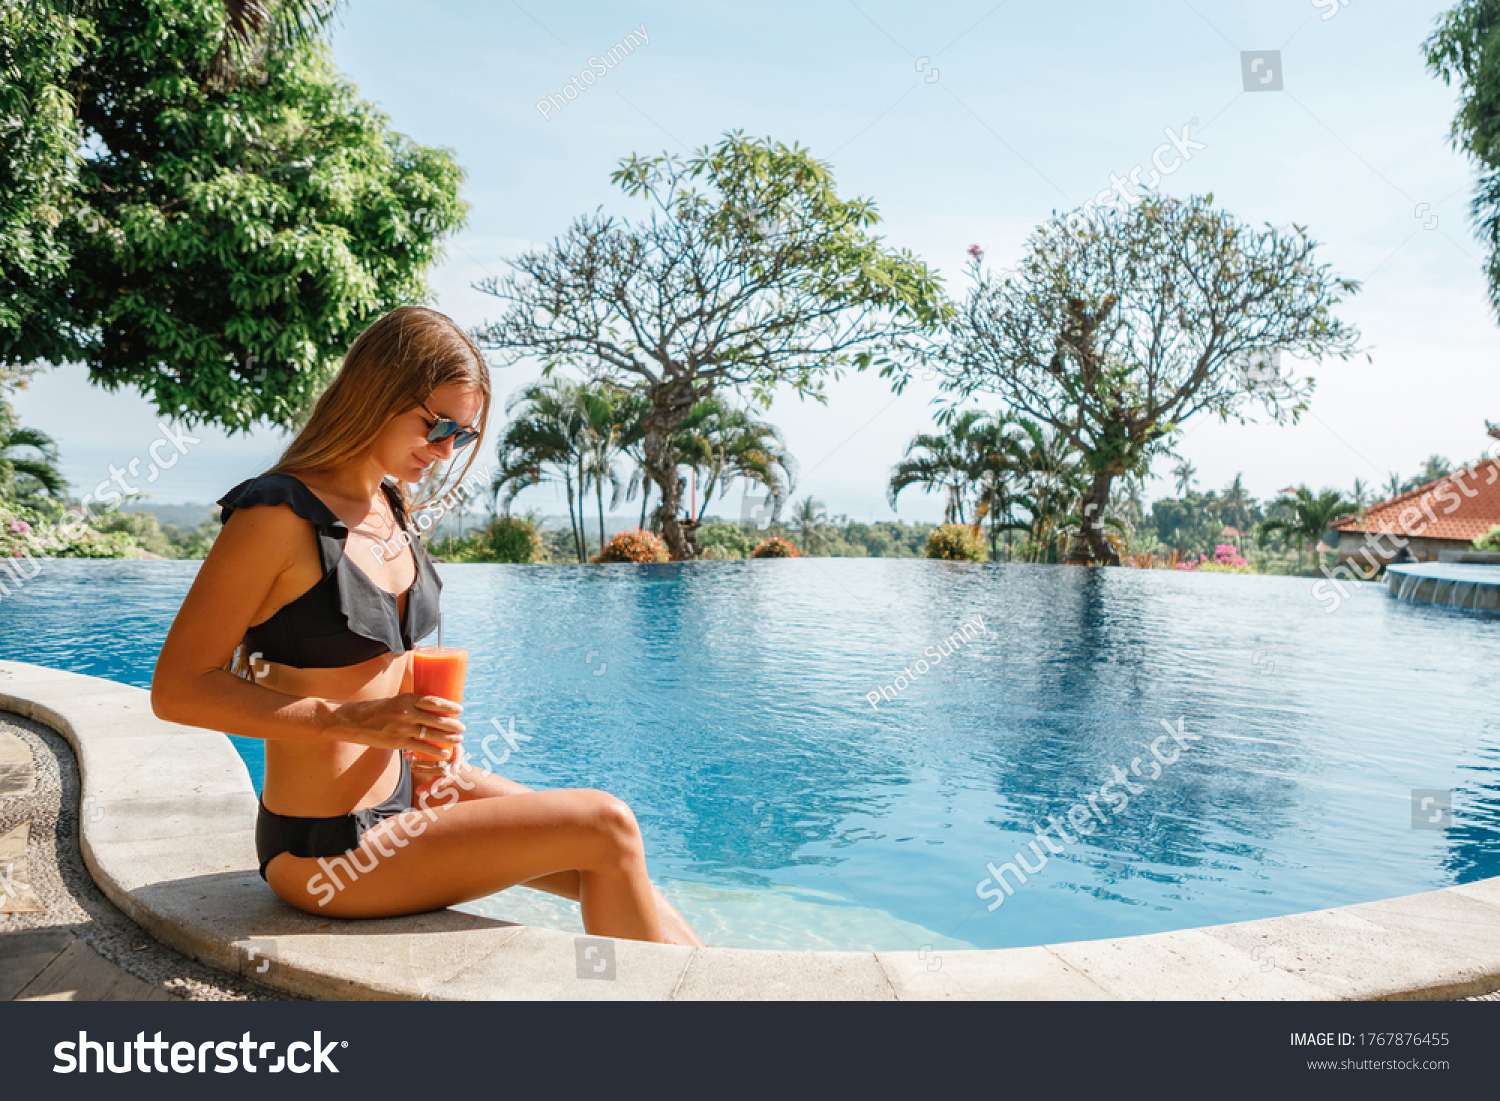 Woman swims to the edge of swimming pool, takes fresh juice, drinks it and swims away, sunny day in the swimming pool outdoors, relaxing in the pool #1767876455